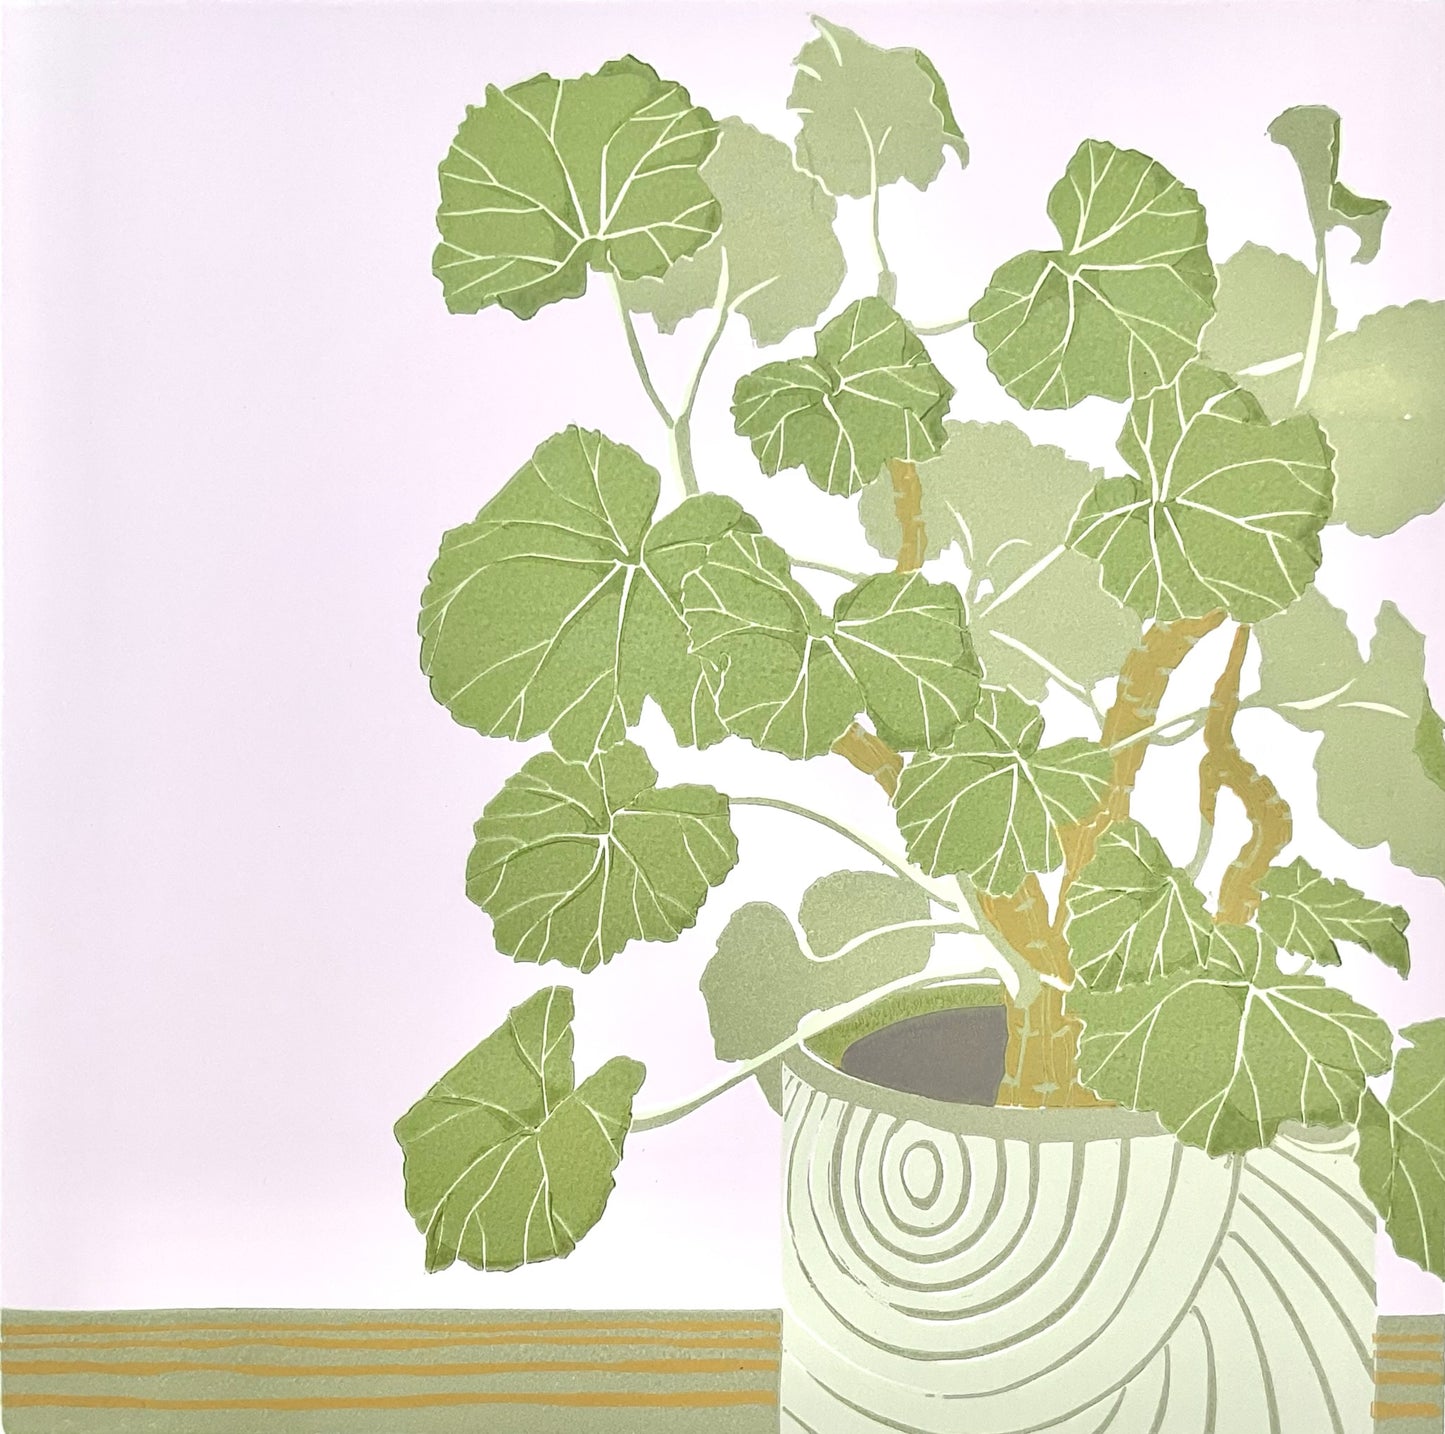 a leafy indoor geranium plant in a modern, famine style. The foliage is in various sage greens. The pot is a cream colour with a swirling geometric design. The ledge that the pot is sitting on is just showing at the bottom and the background is a flat, warm delicate pink.